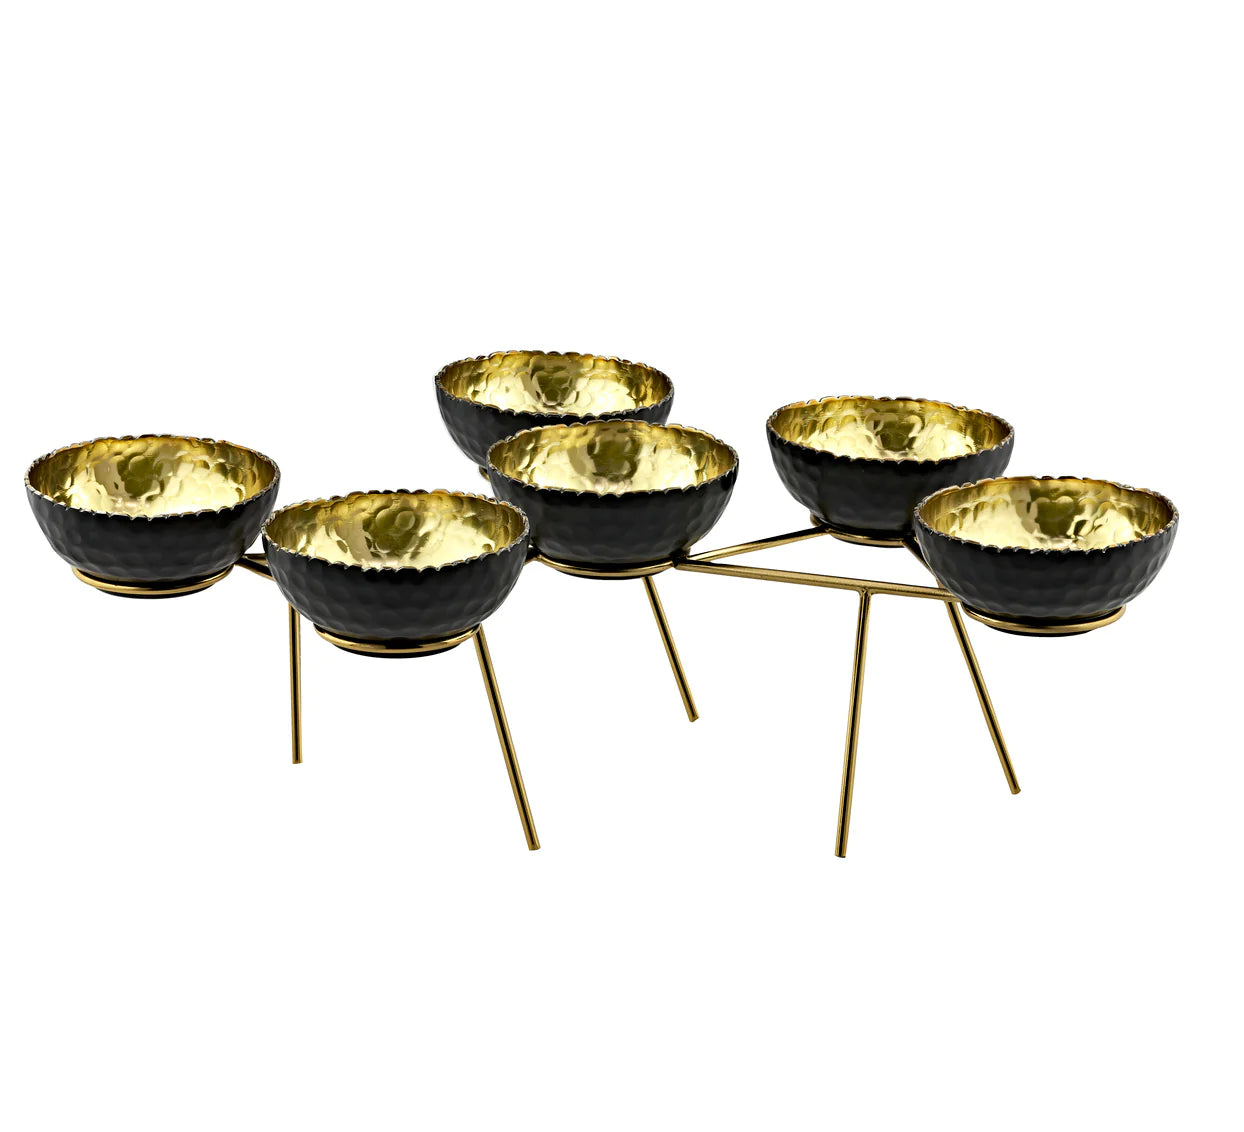 Set of 6 bowl and stand